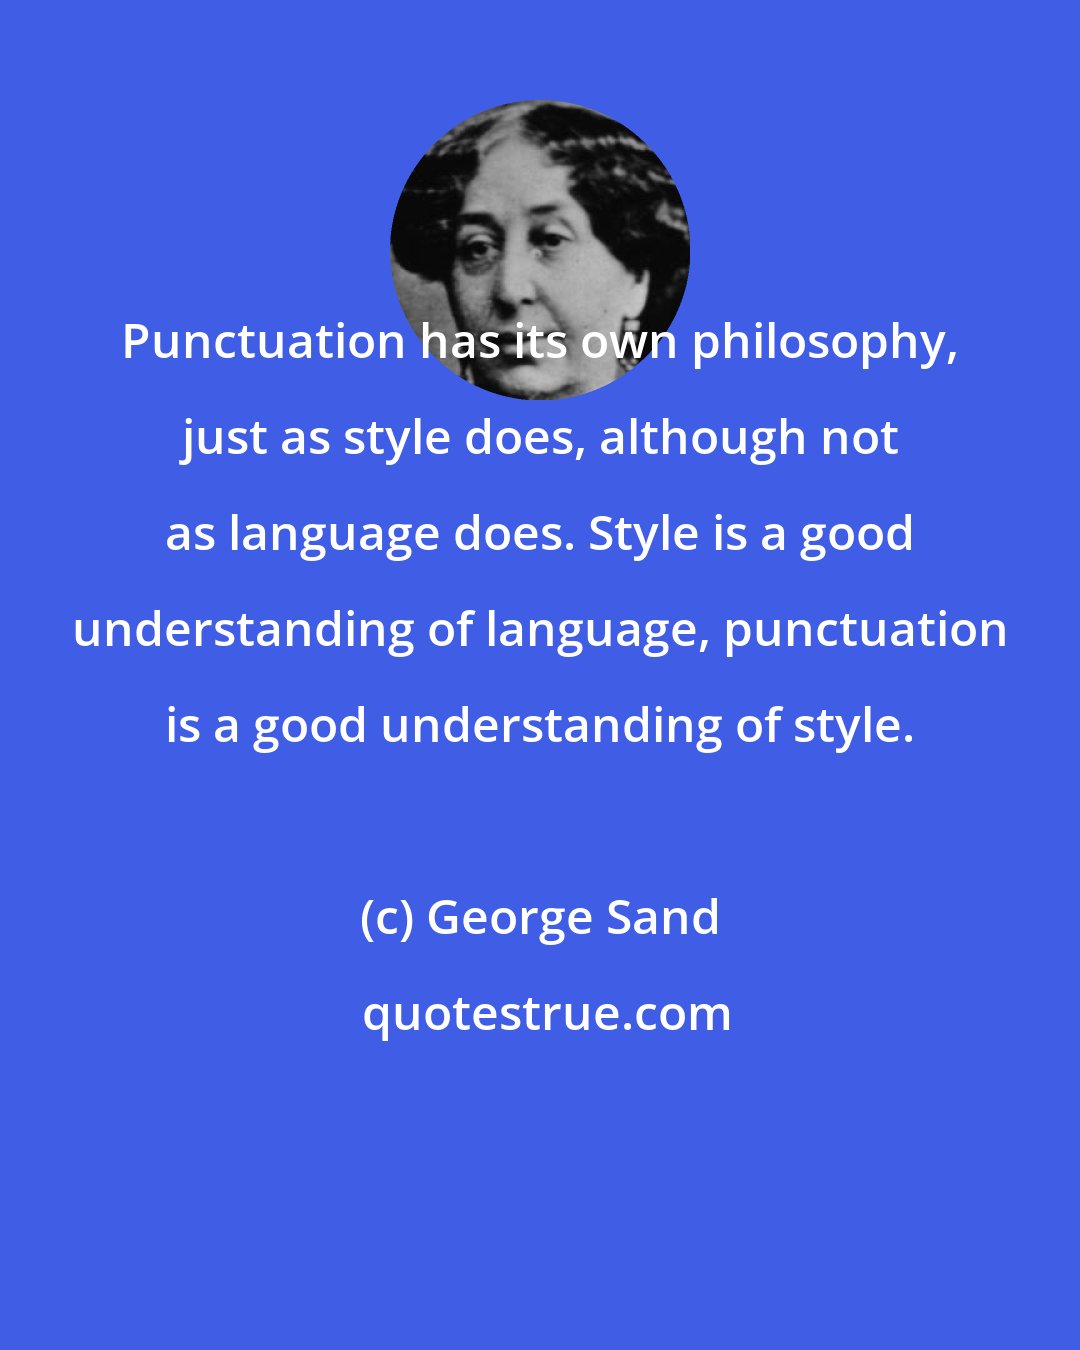 George Sand: Punctuation has its own philosophy, just as style does, although not as language does. Style is a good understanding of language, punctuation is a good understanding of style.